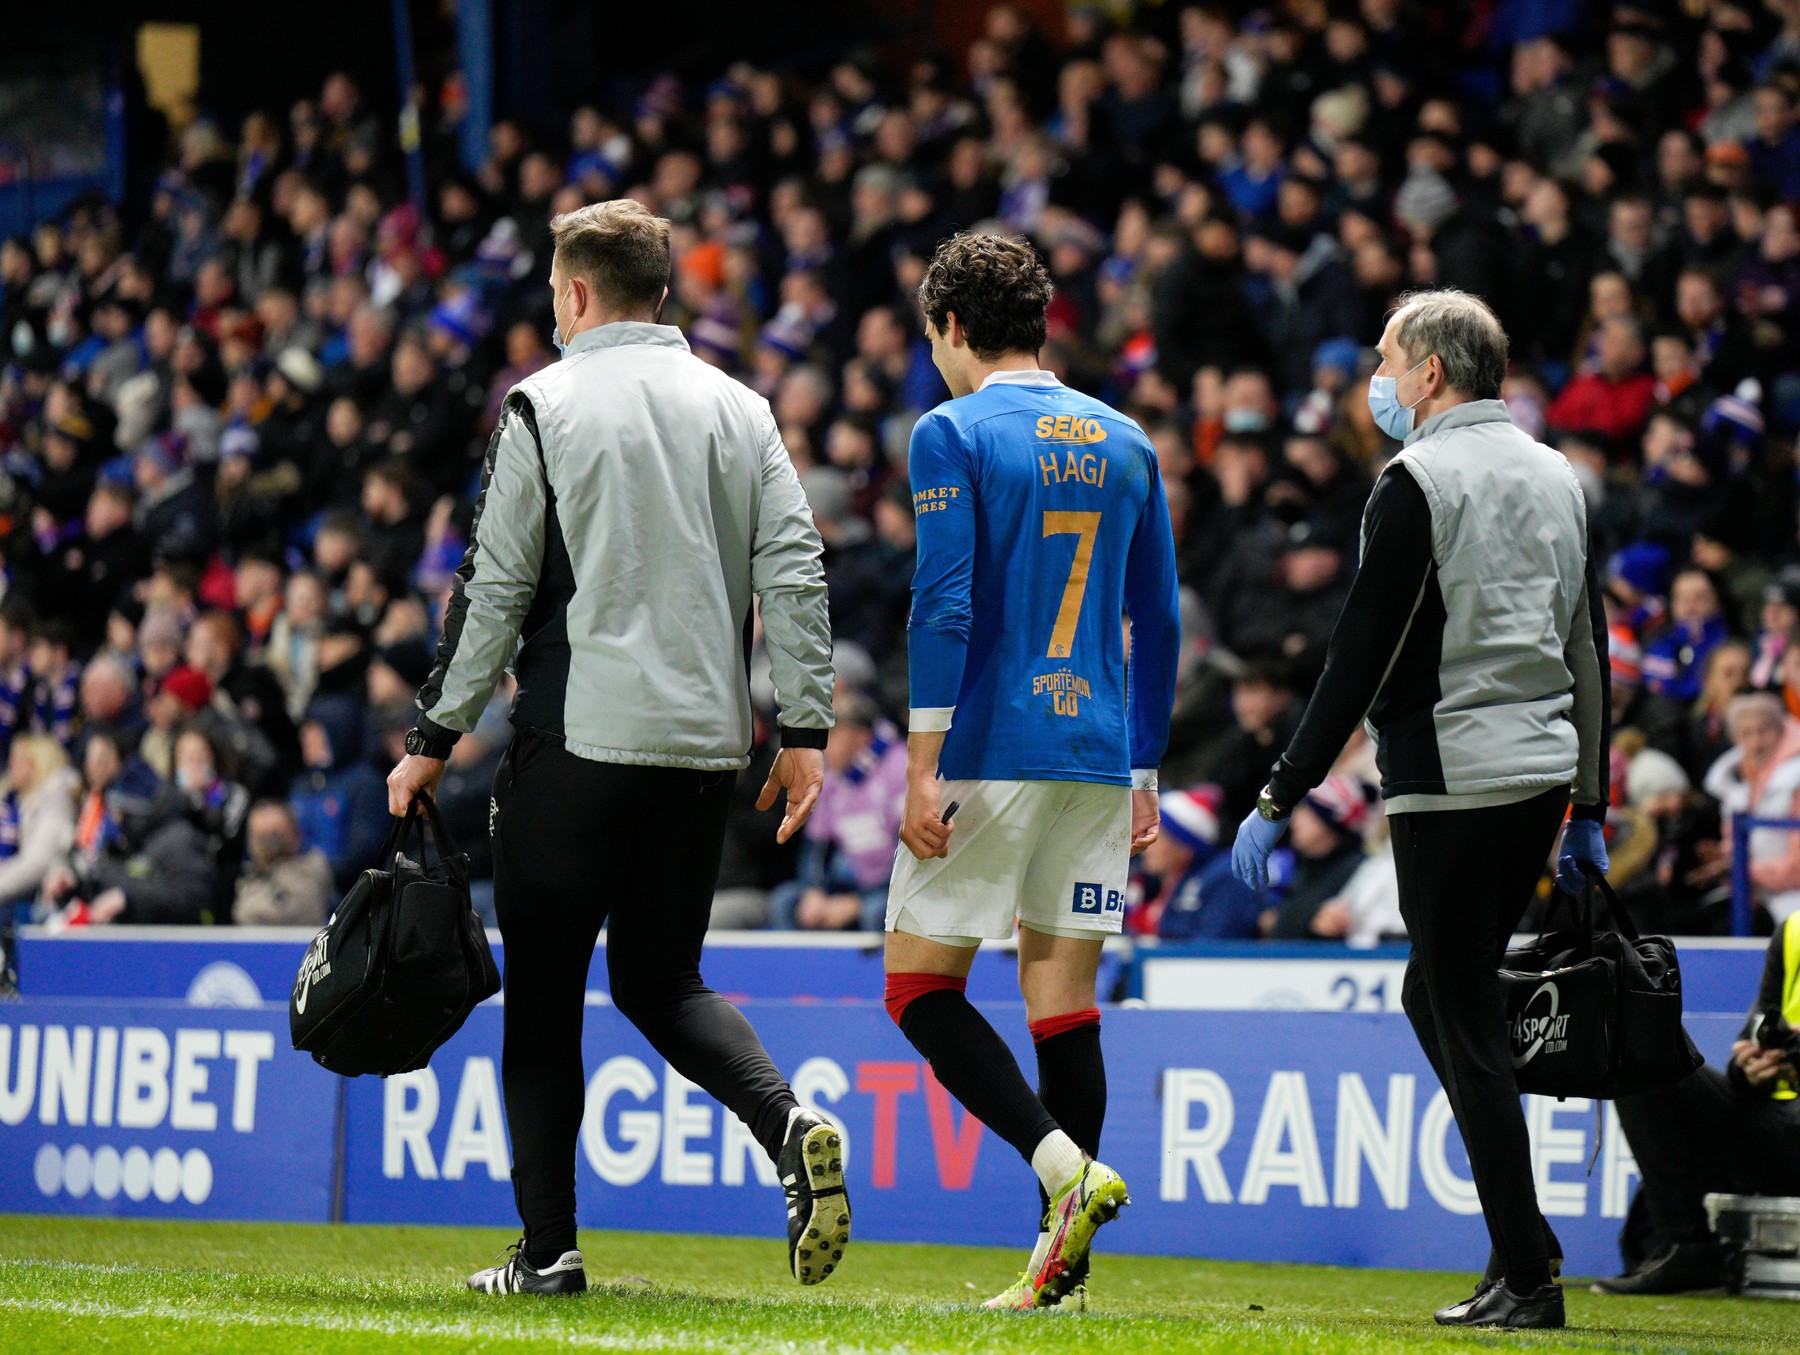 Ianis Hagi of Rangers injured and substituted for Alex Lowry of Rangers (debut).
Rangers v Stirling Albion, Scottish Cup, Football, Ibrox Stadium, Glasgow, Scotland, UK - 21 Jan 2022,Image: 655202990, License: Rights-managed, Restrictions: EDITORIAL USE ONLY No use with unauthorised audio, video, data, fixture lists, club/league logos or 